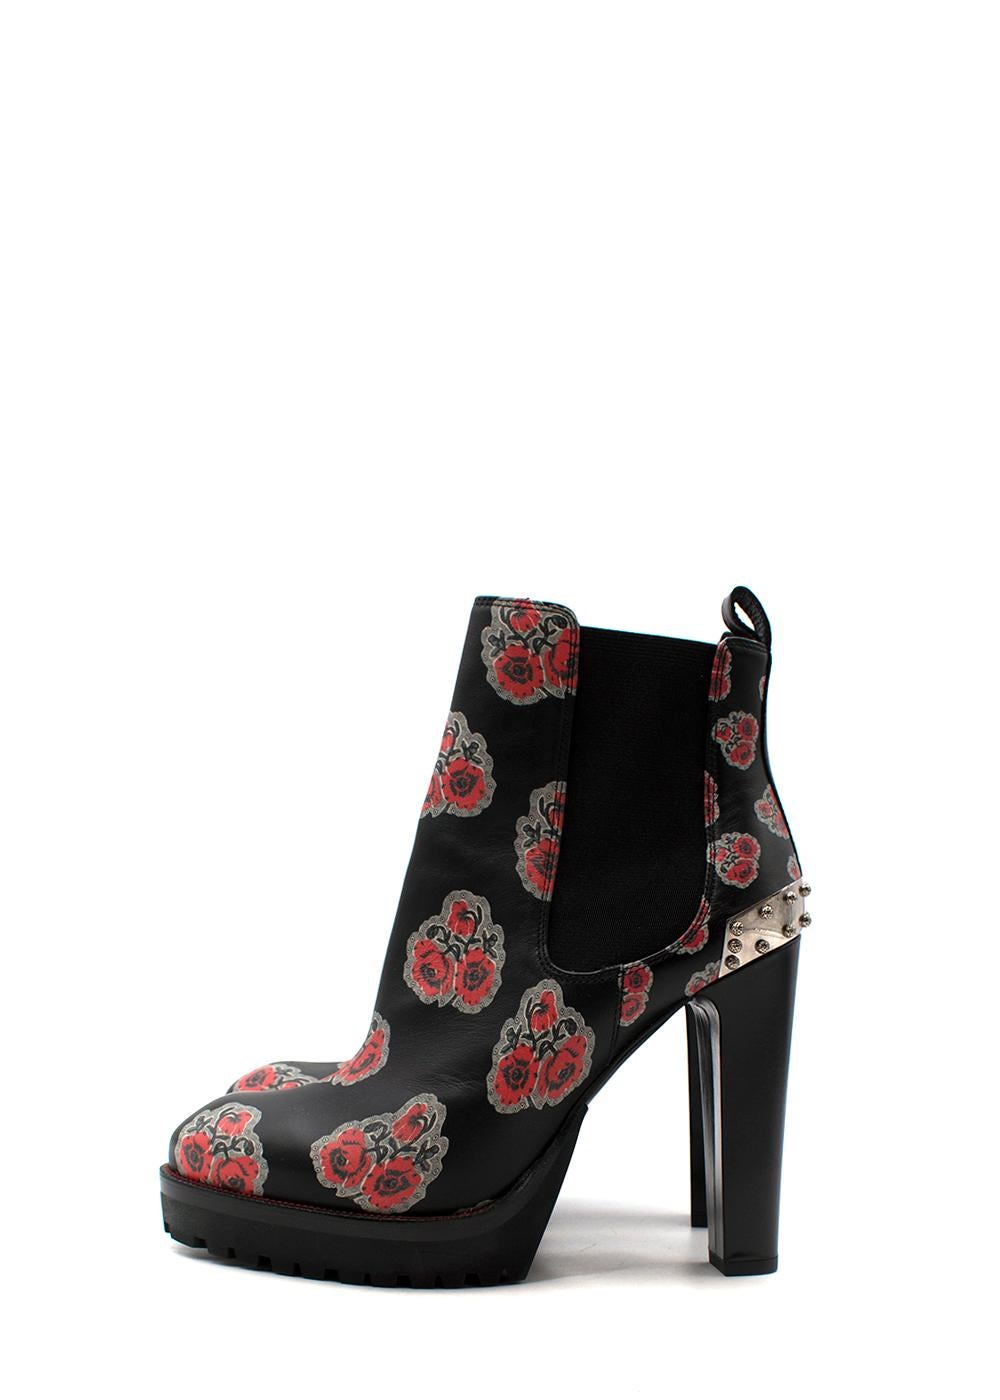 Poppy Print Leather Platform Heeled Ankle Boots In New Condition For Sale In London, GB